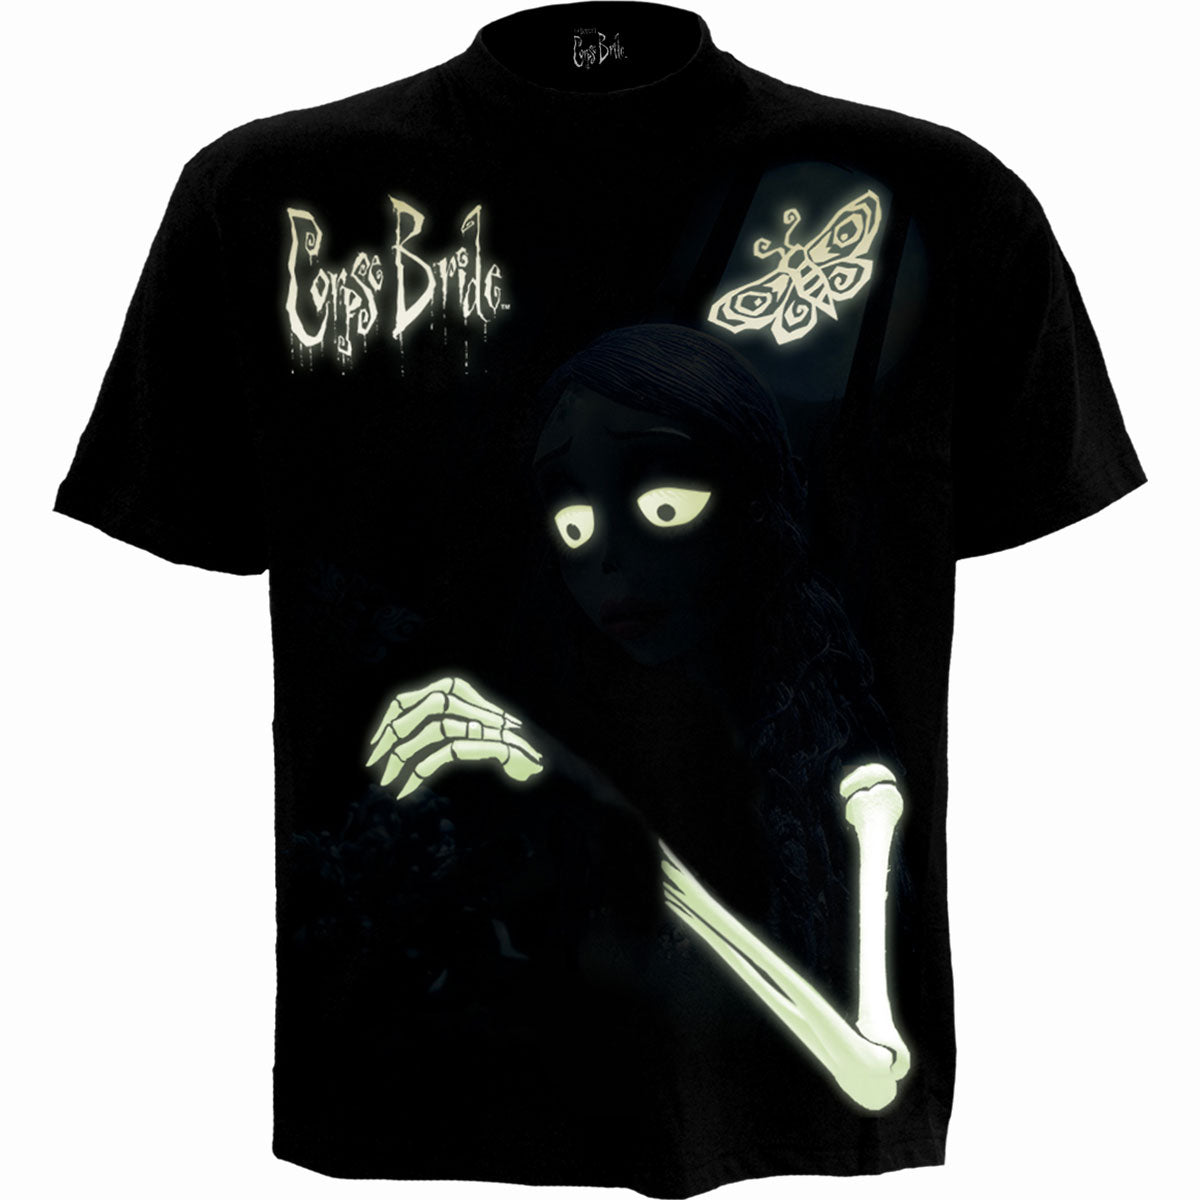 CORPSE BRIDE - GLOW IN THE DARK - Front Print T-Shirt Black